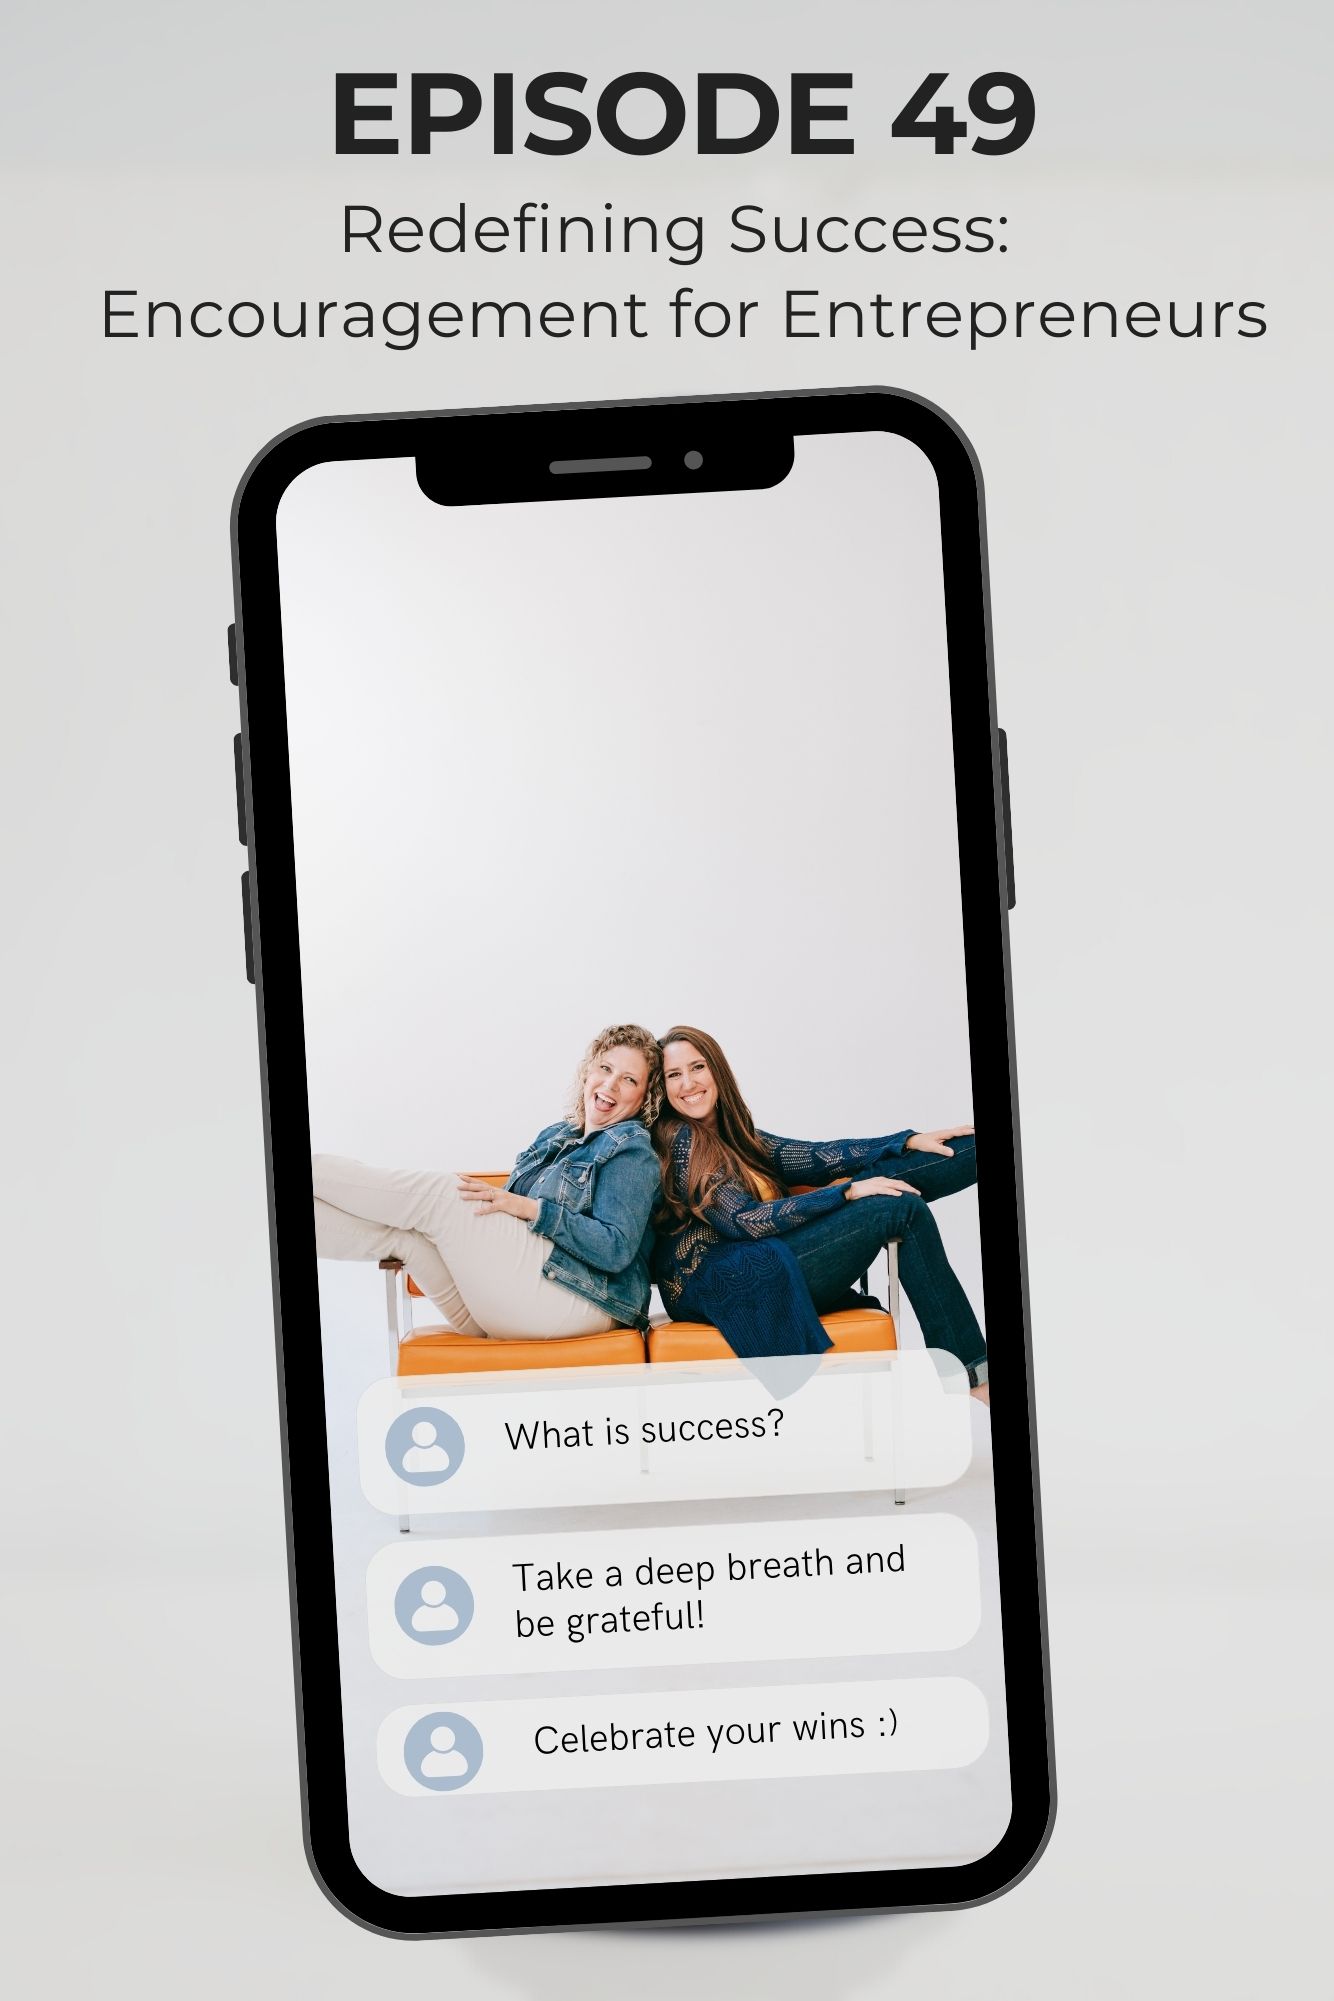 A white background with two Christian women business owners who have a podcast called the Christian business breakdown. The image is a phone with a picture of two women sitting back to back on an orange couch talking about how to redefine success and encouragement for entrepreneurs.